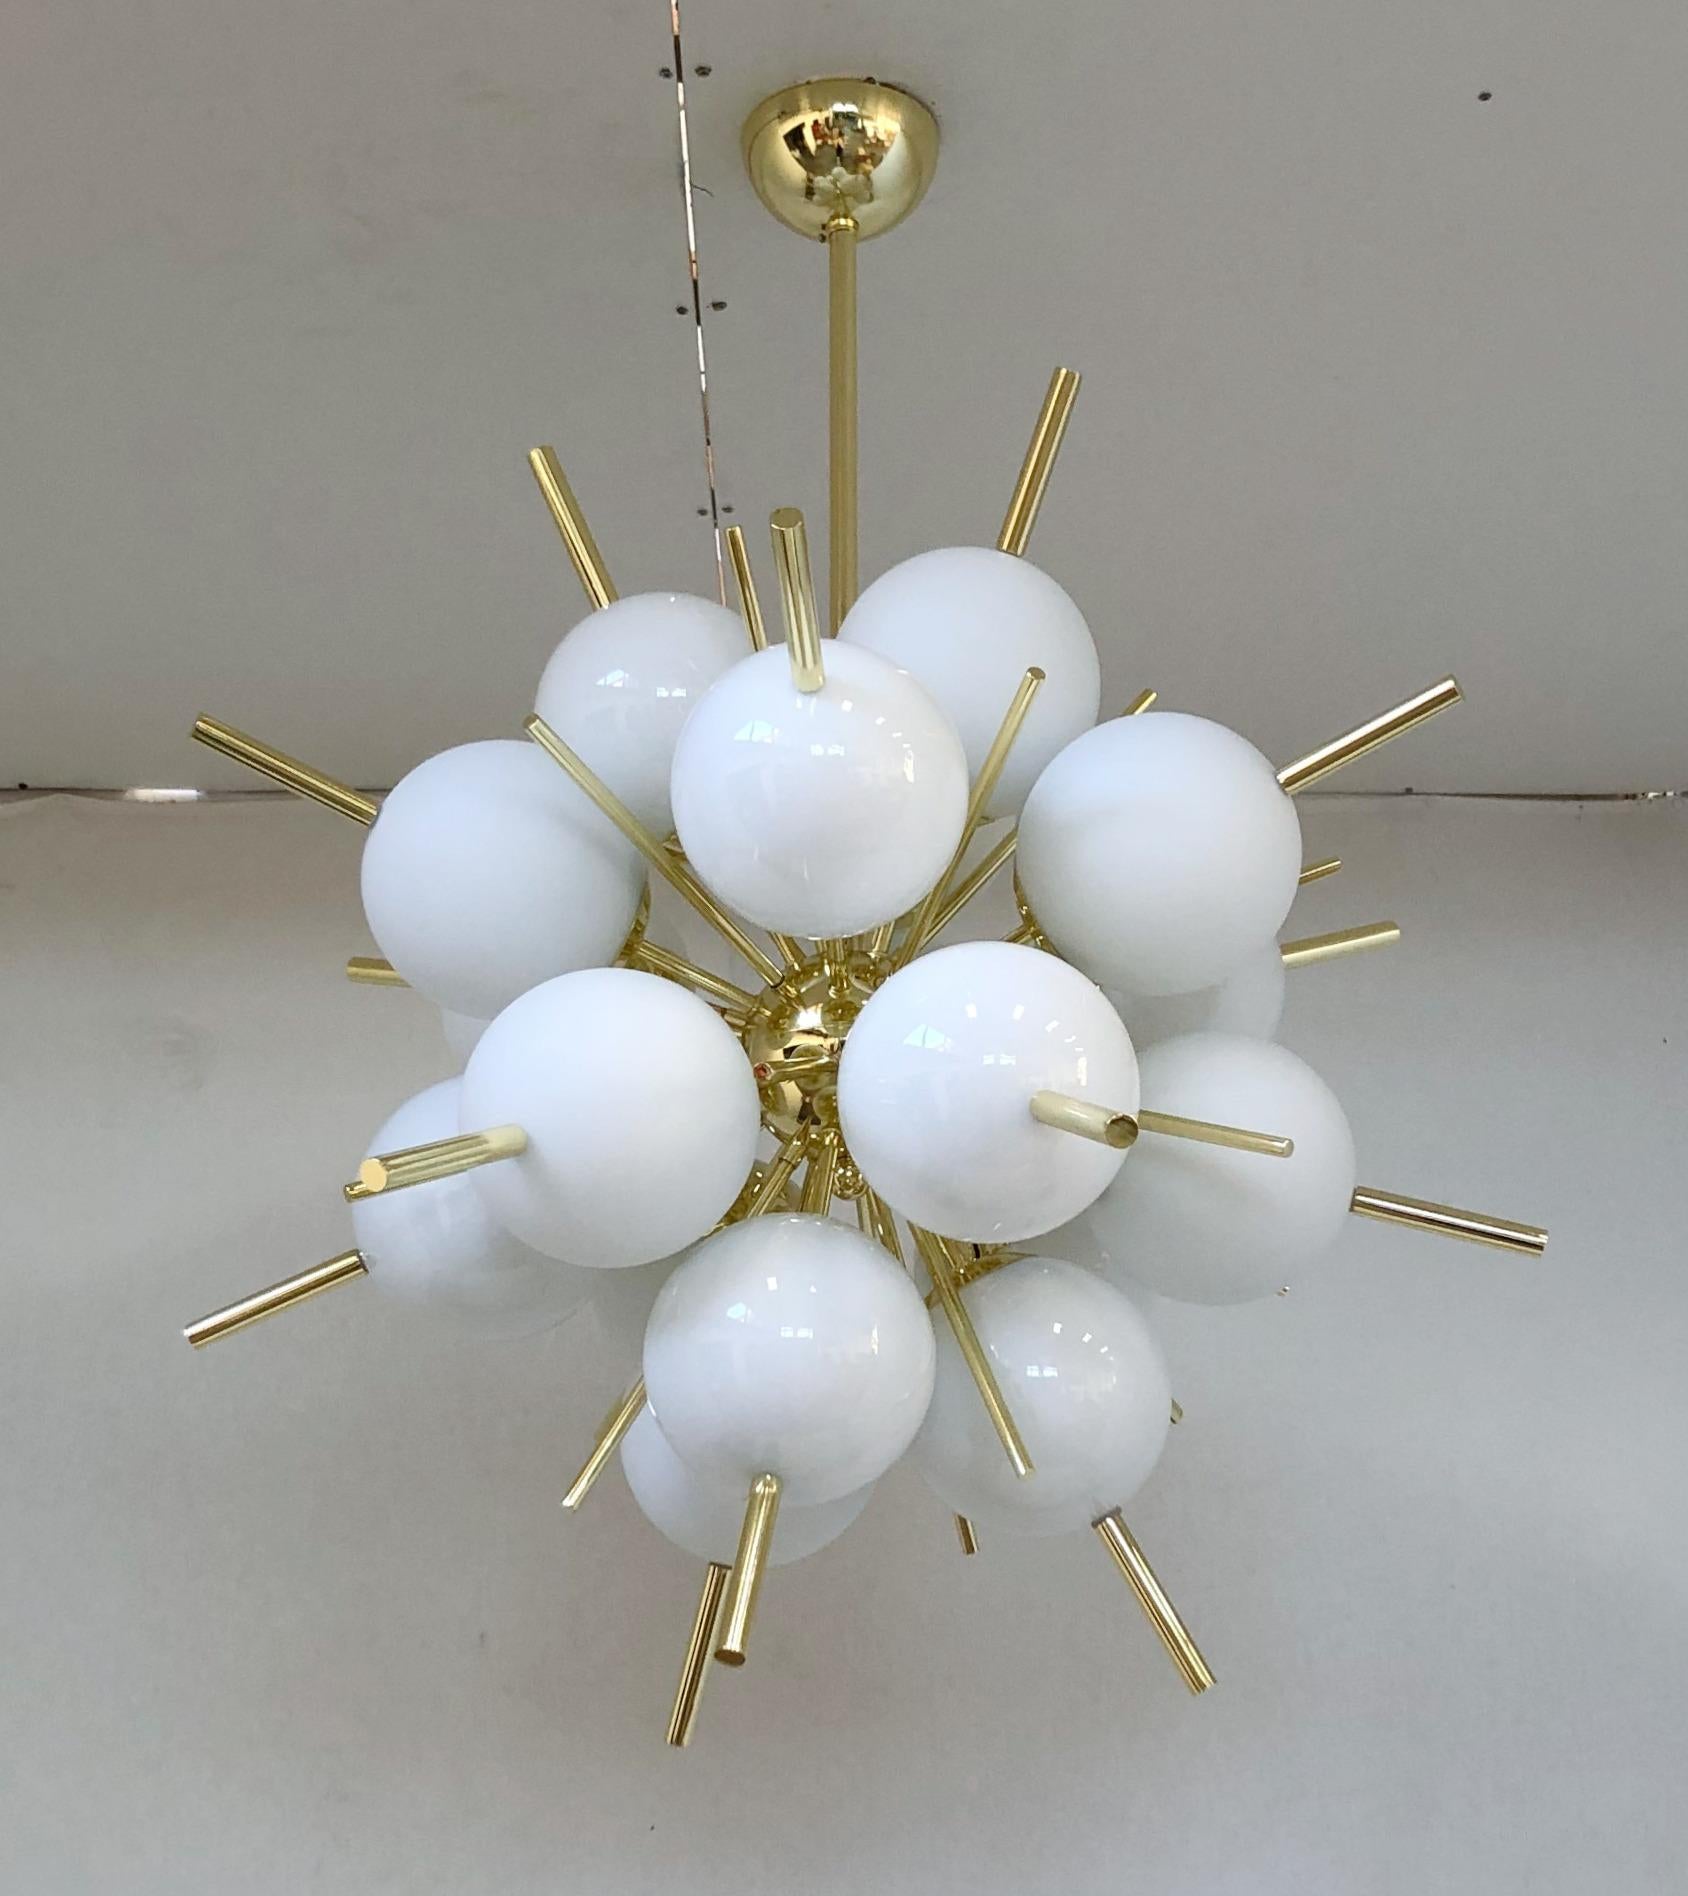 Italian sputnik chandelier with 18 Murano glass globes and brass cylinder spikes mounted on metal frame in light gold plated finish / Designed by Fabio Bergomi for Fabio Ltd / Made in Italy
Measures: Diameter 28 inches, height 34 inches including